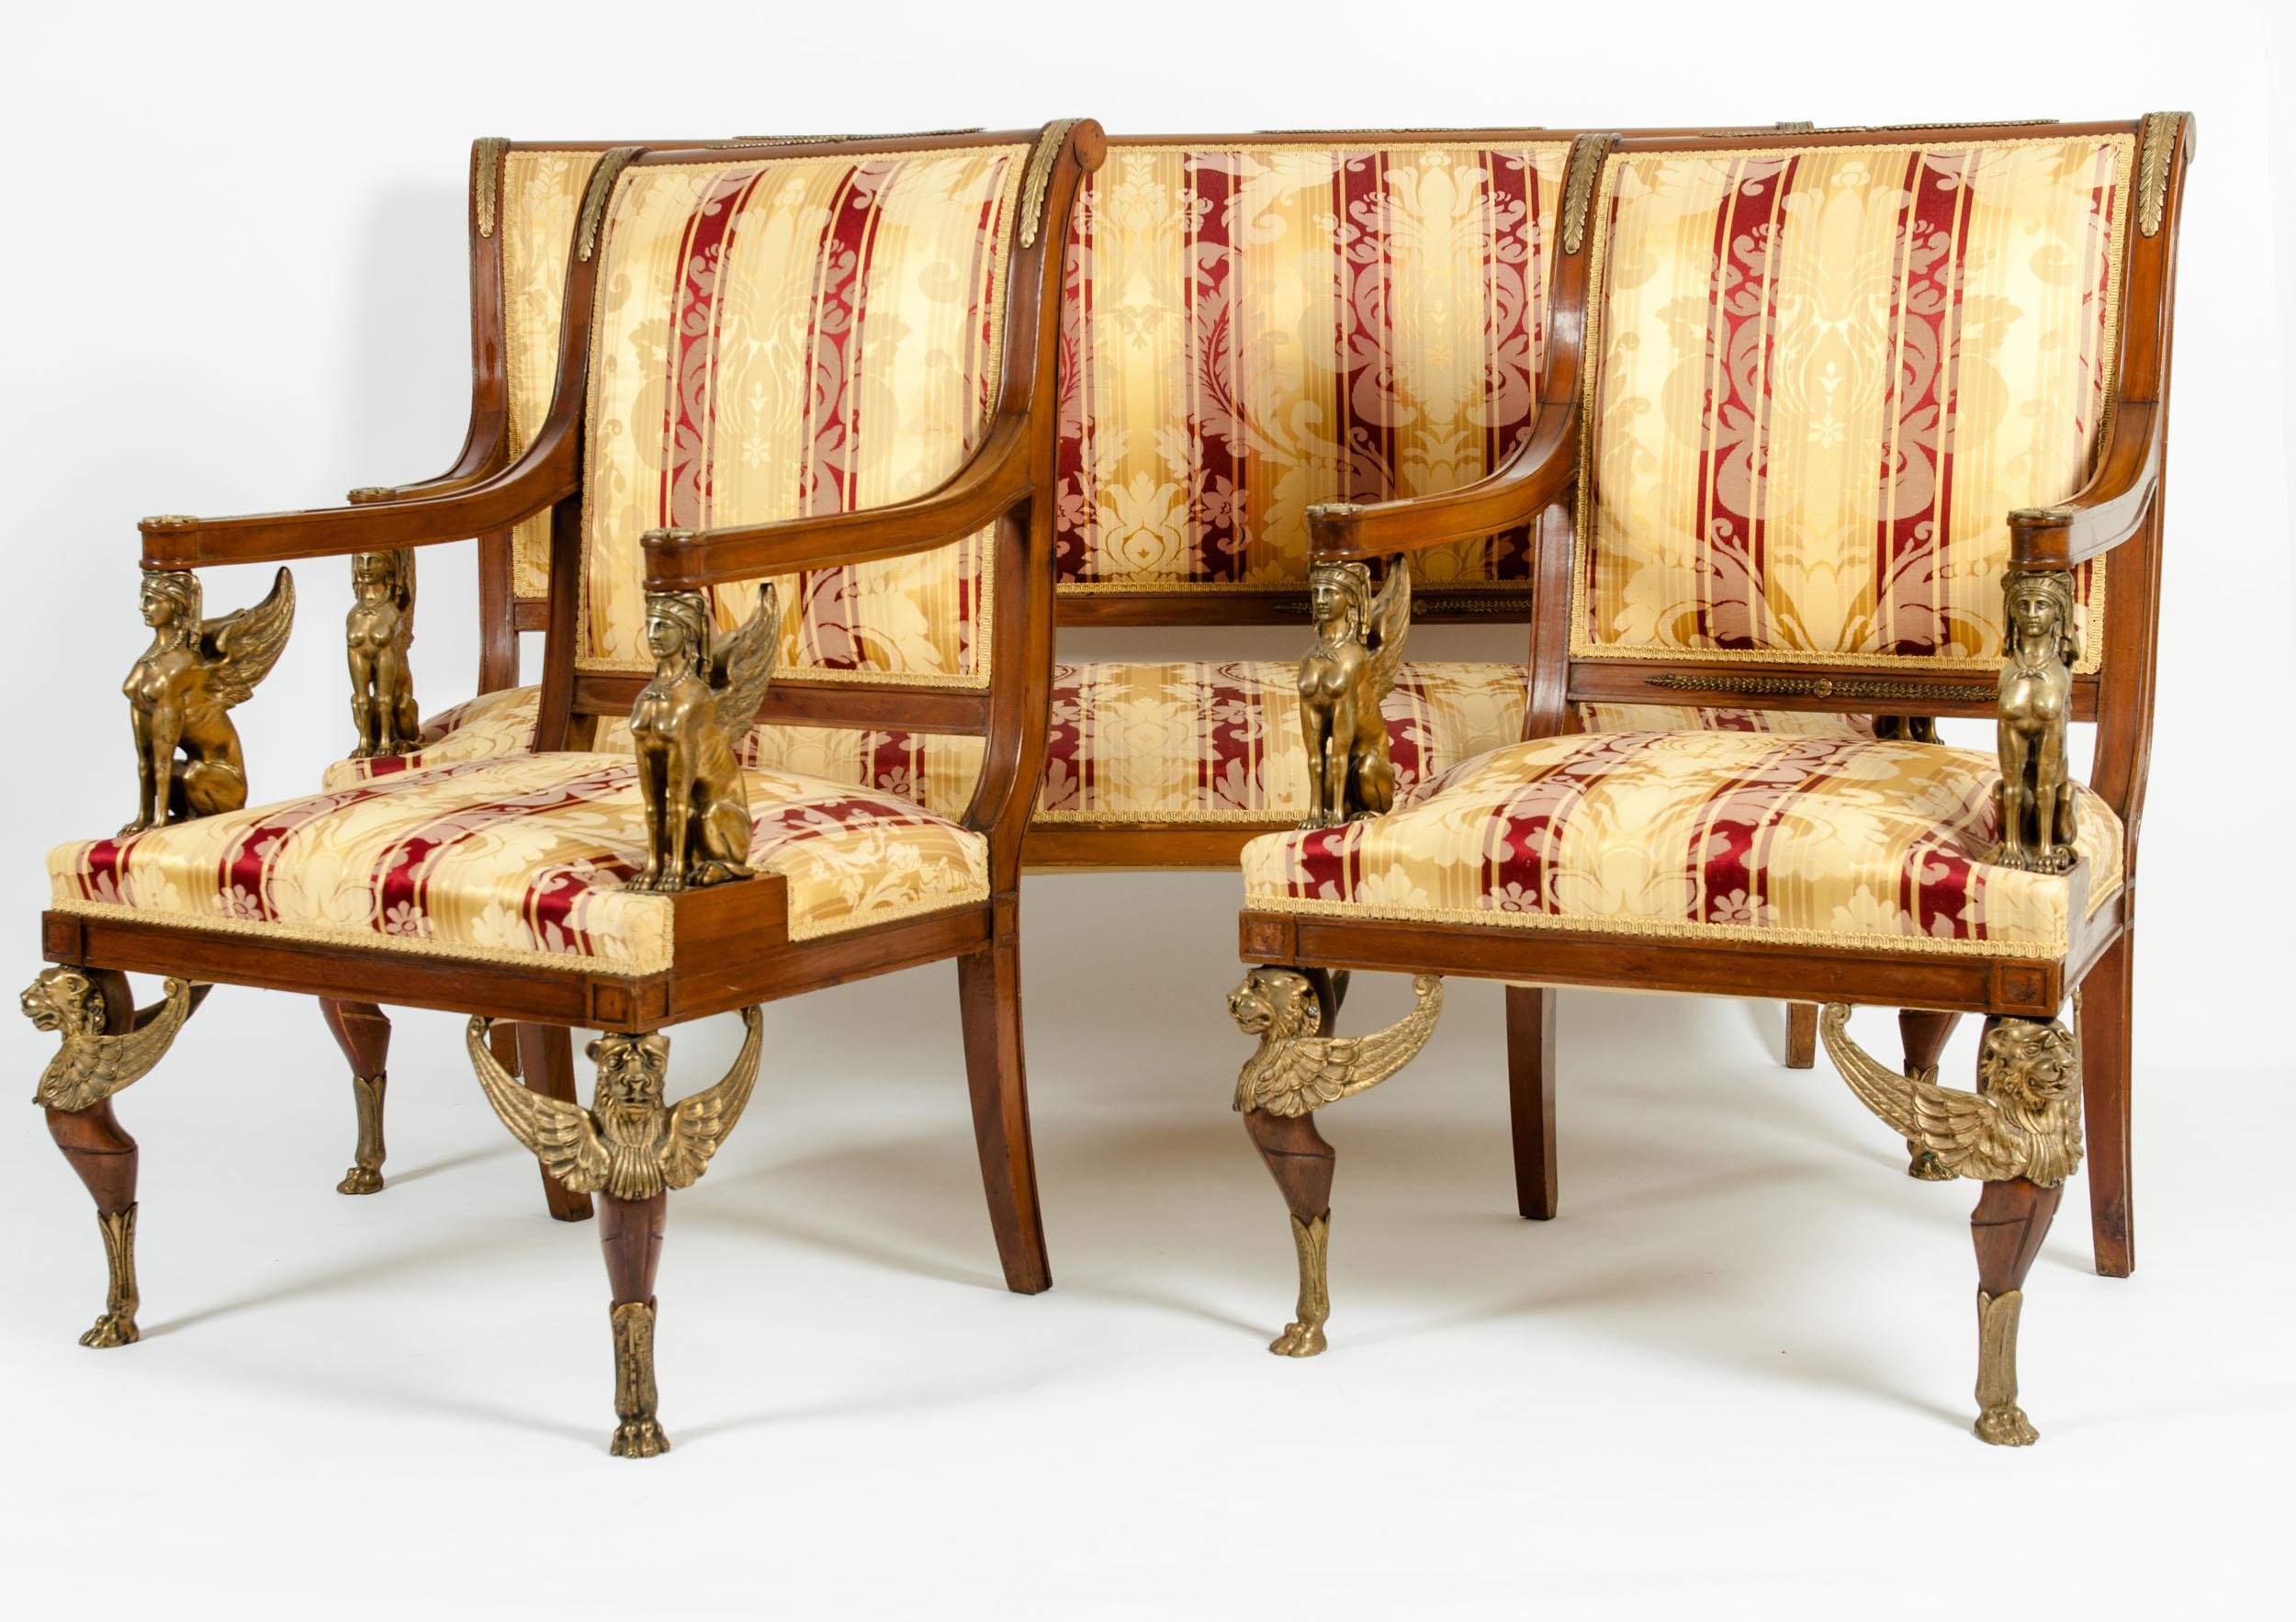 Spectacular late 19th century French Empire style handcrafted three piece gilt bronze salon suite. One upholstered sofa & one pair of armchairs. The armchairs are set on four straight mahogany legs, the front two of which are set on gilt bronze paw